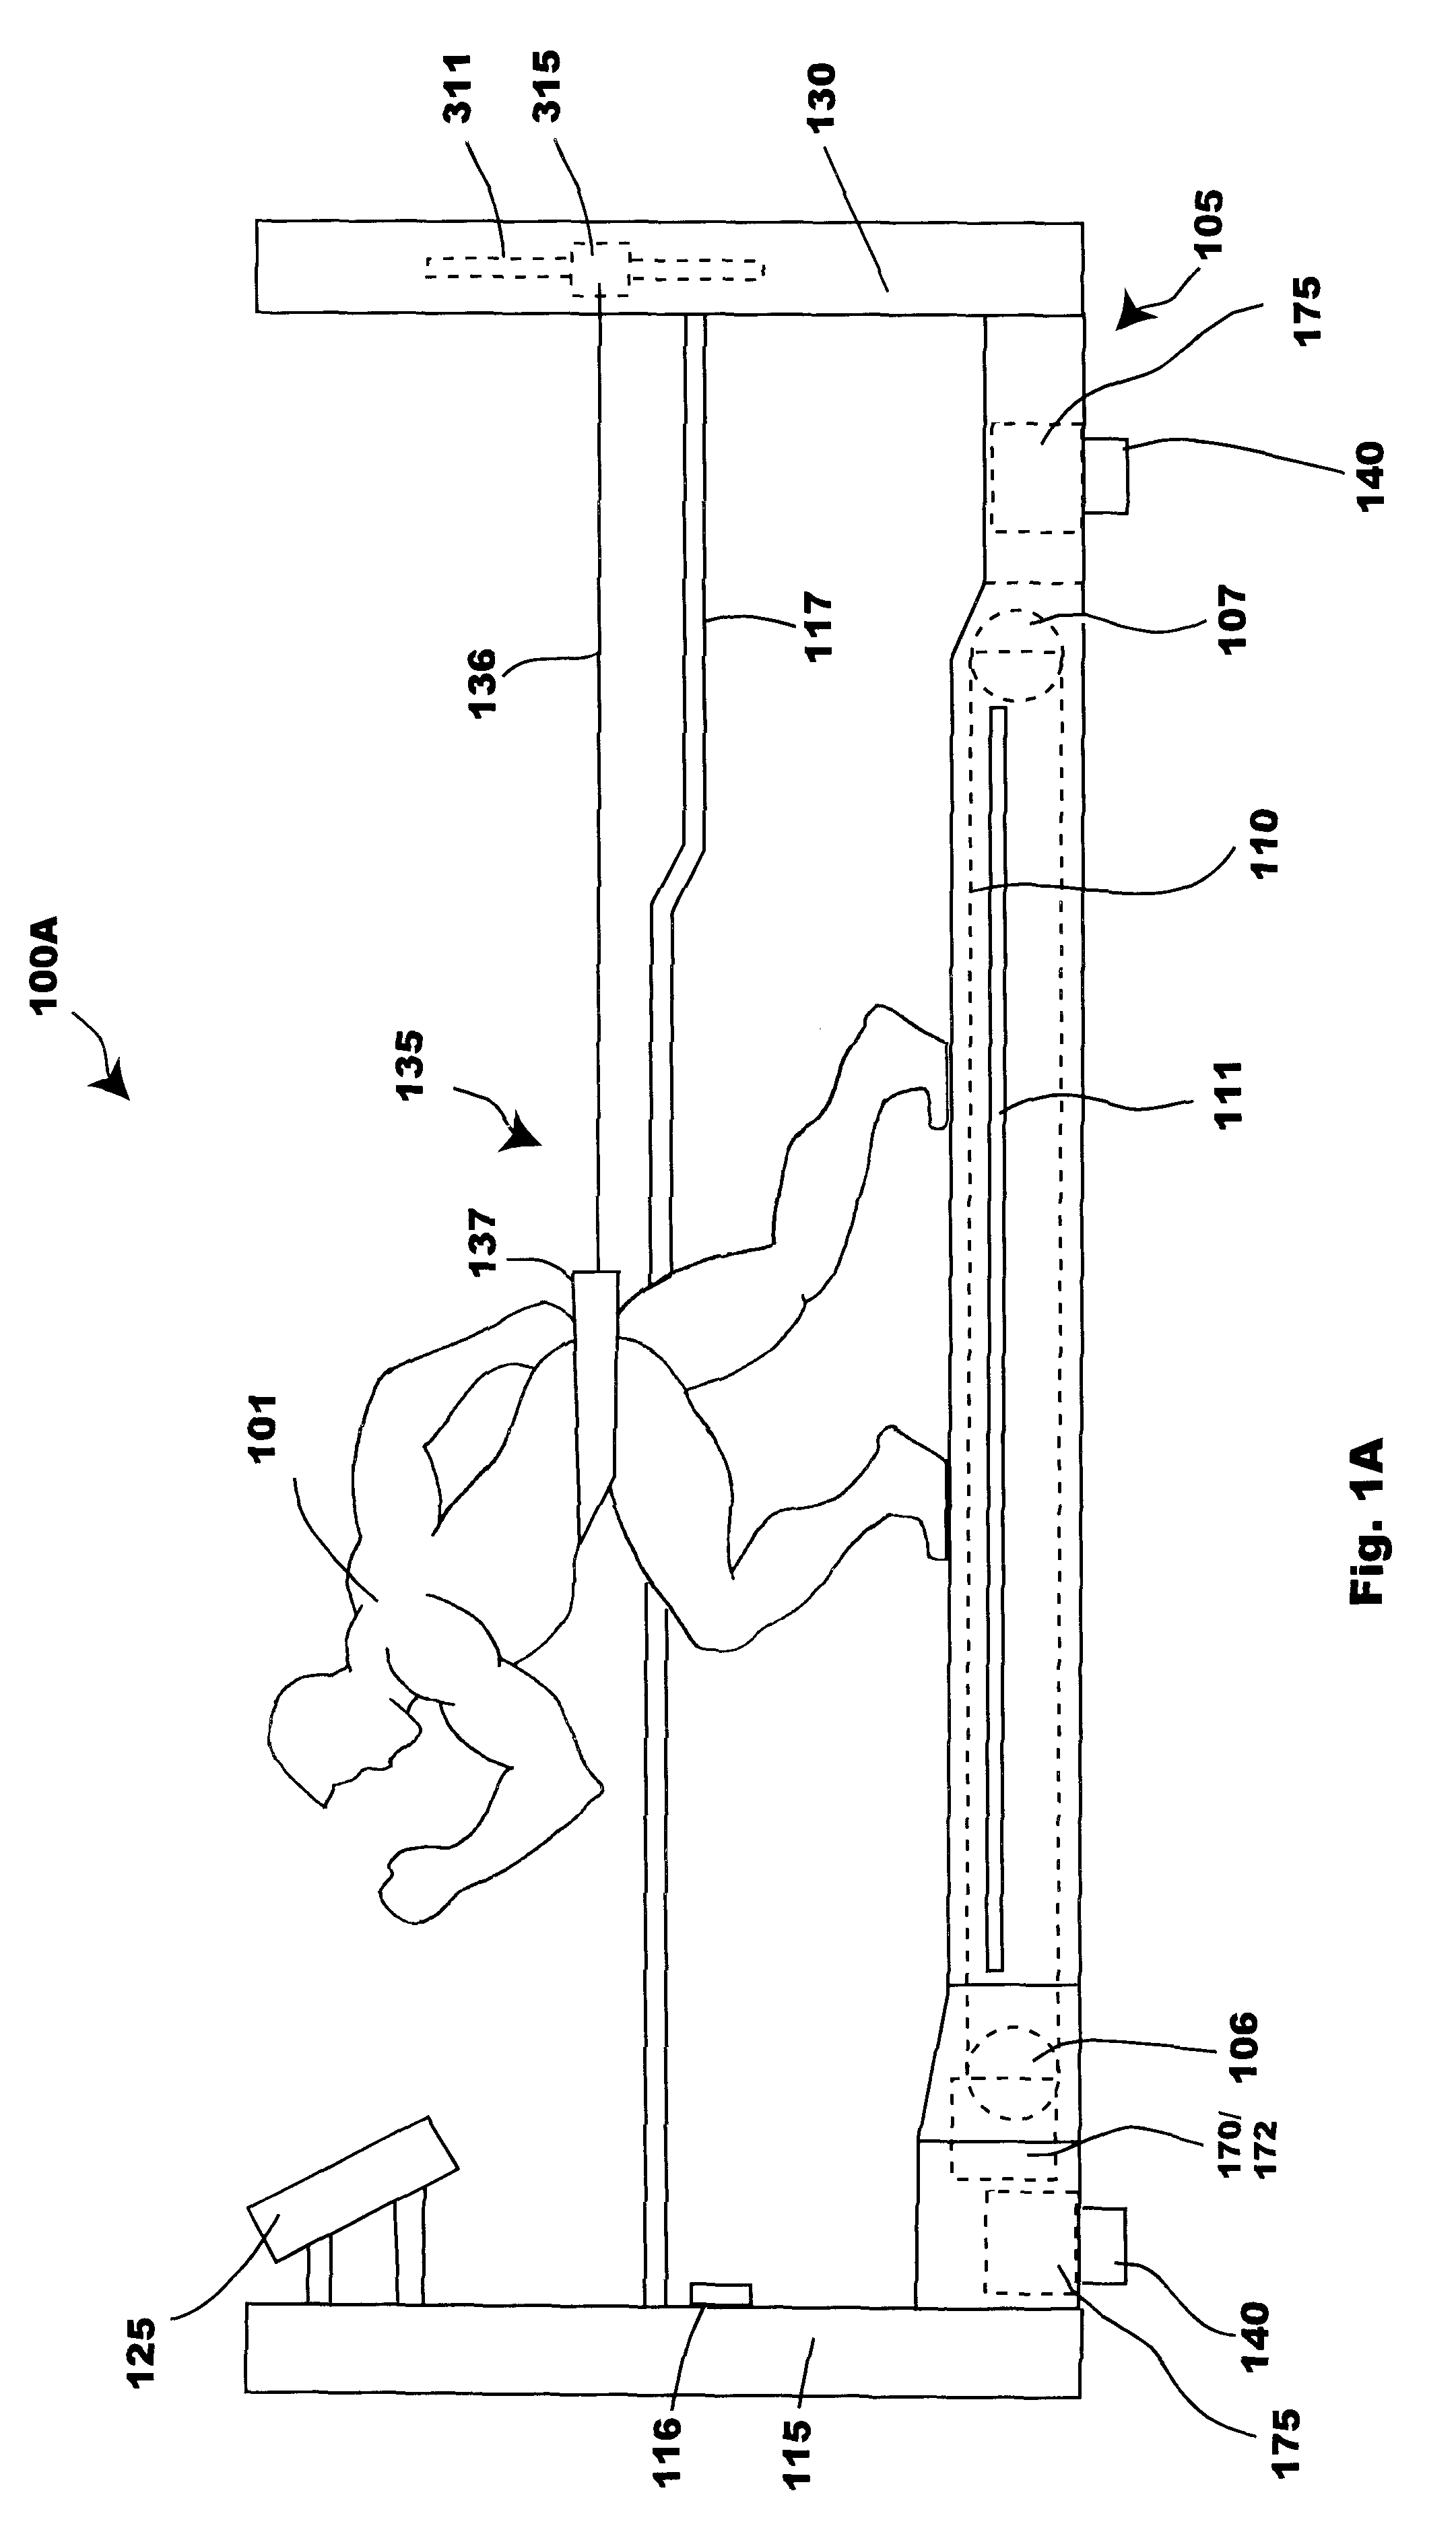 Bipedal locomotion training and performance evaluation device and method